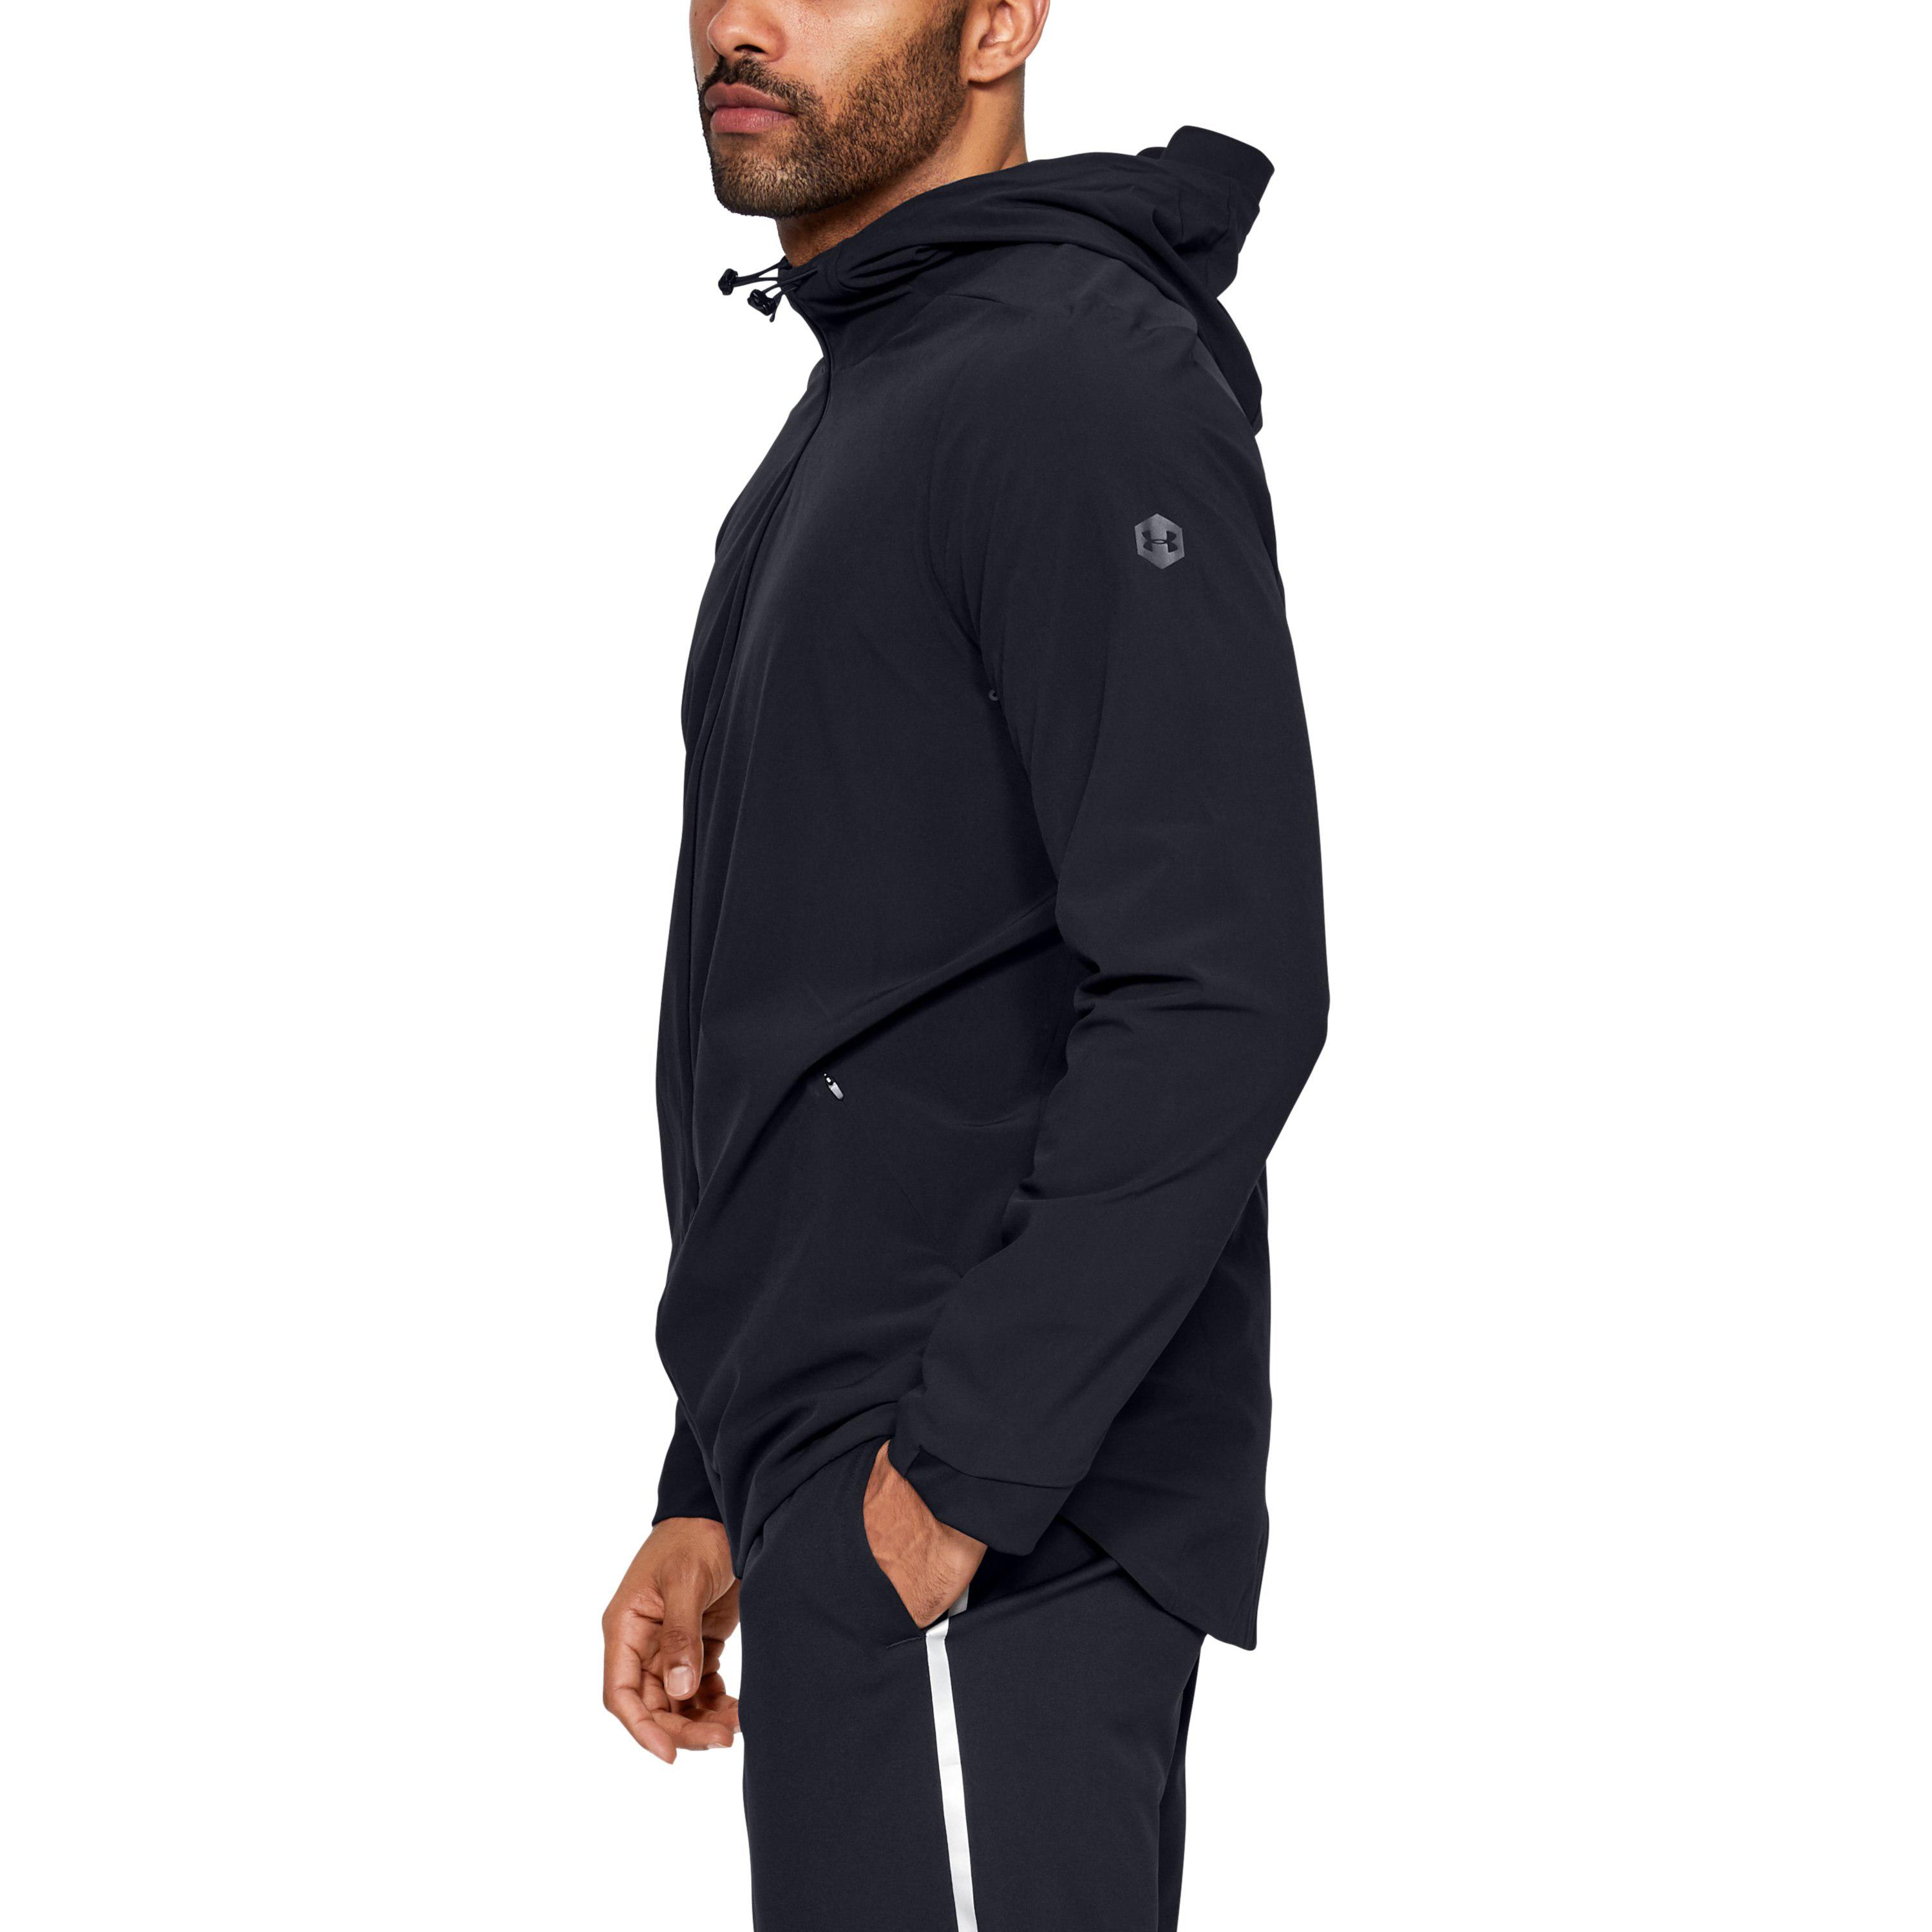 Buy Under Armour Athlete Recovery Jacket | UP TO 60% OFF